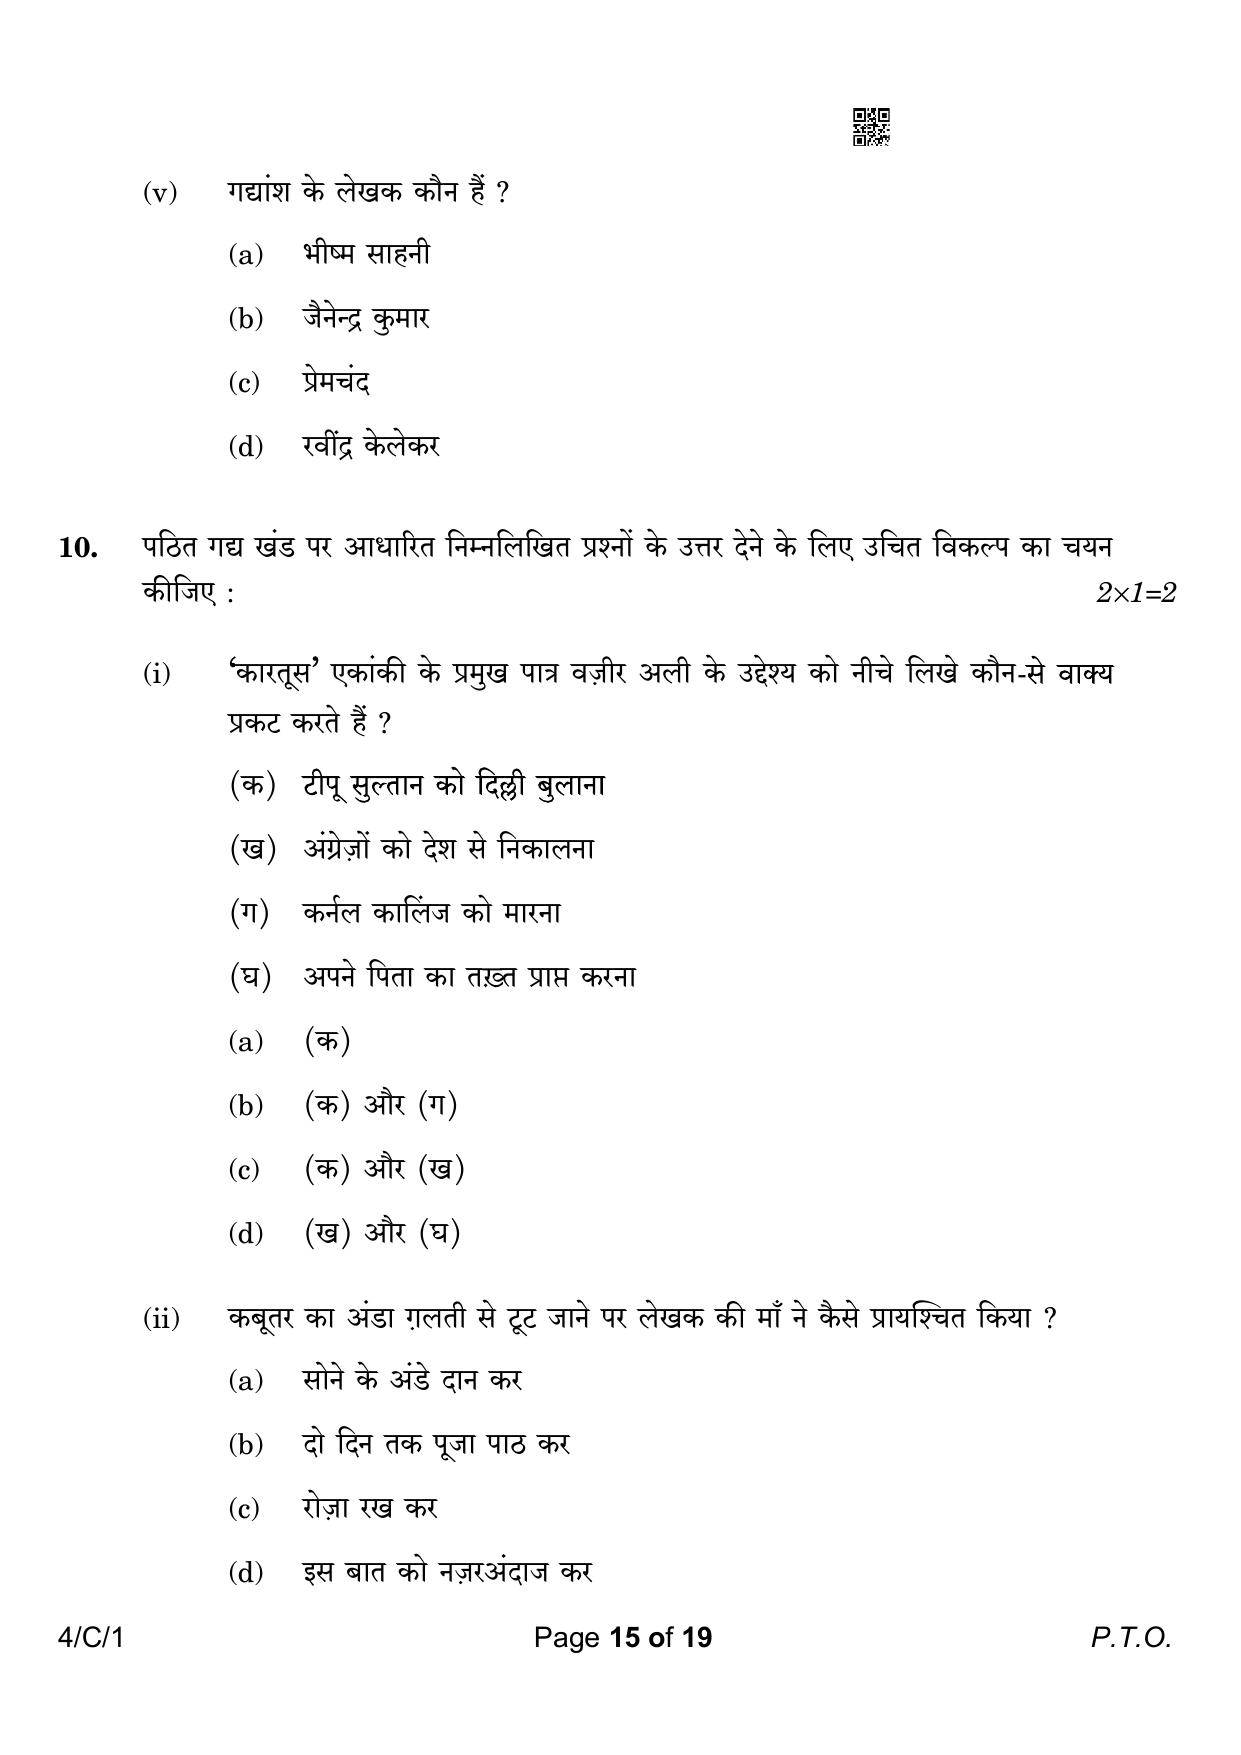 CBSE Class 10 4-1 Hindi B 2023 (Compartment) Question Paper - Page 15